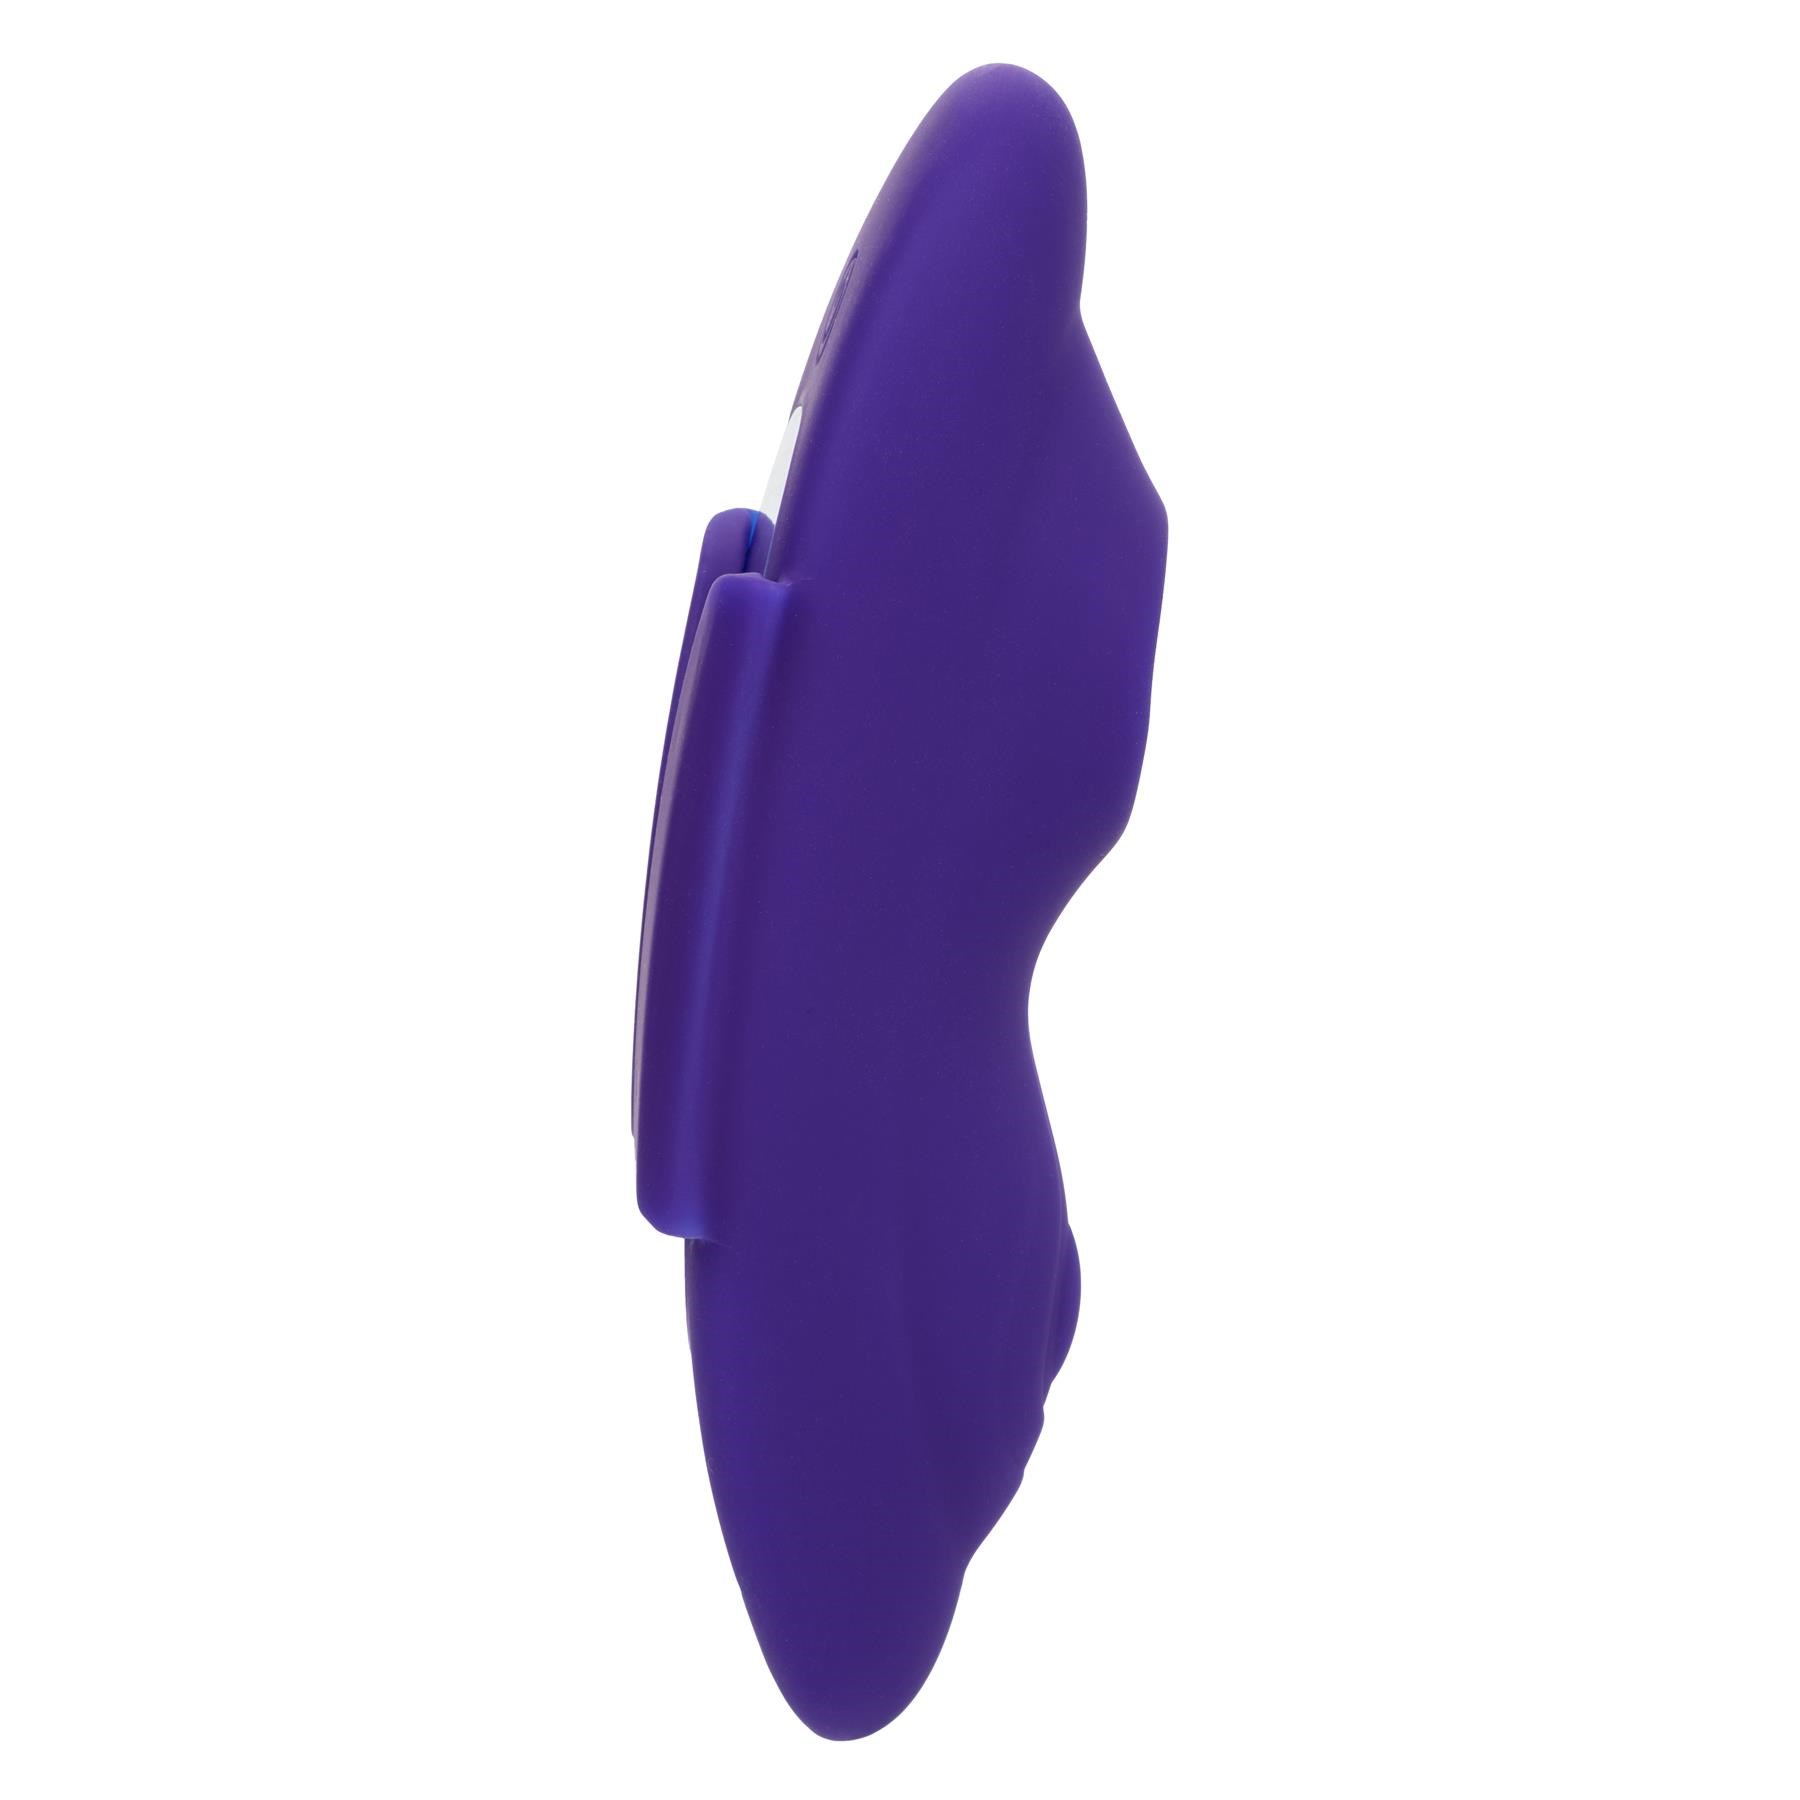 Lock-N-Play Remote Suction Panty Teaser - Panty Vibe